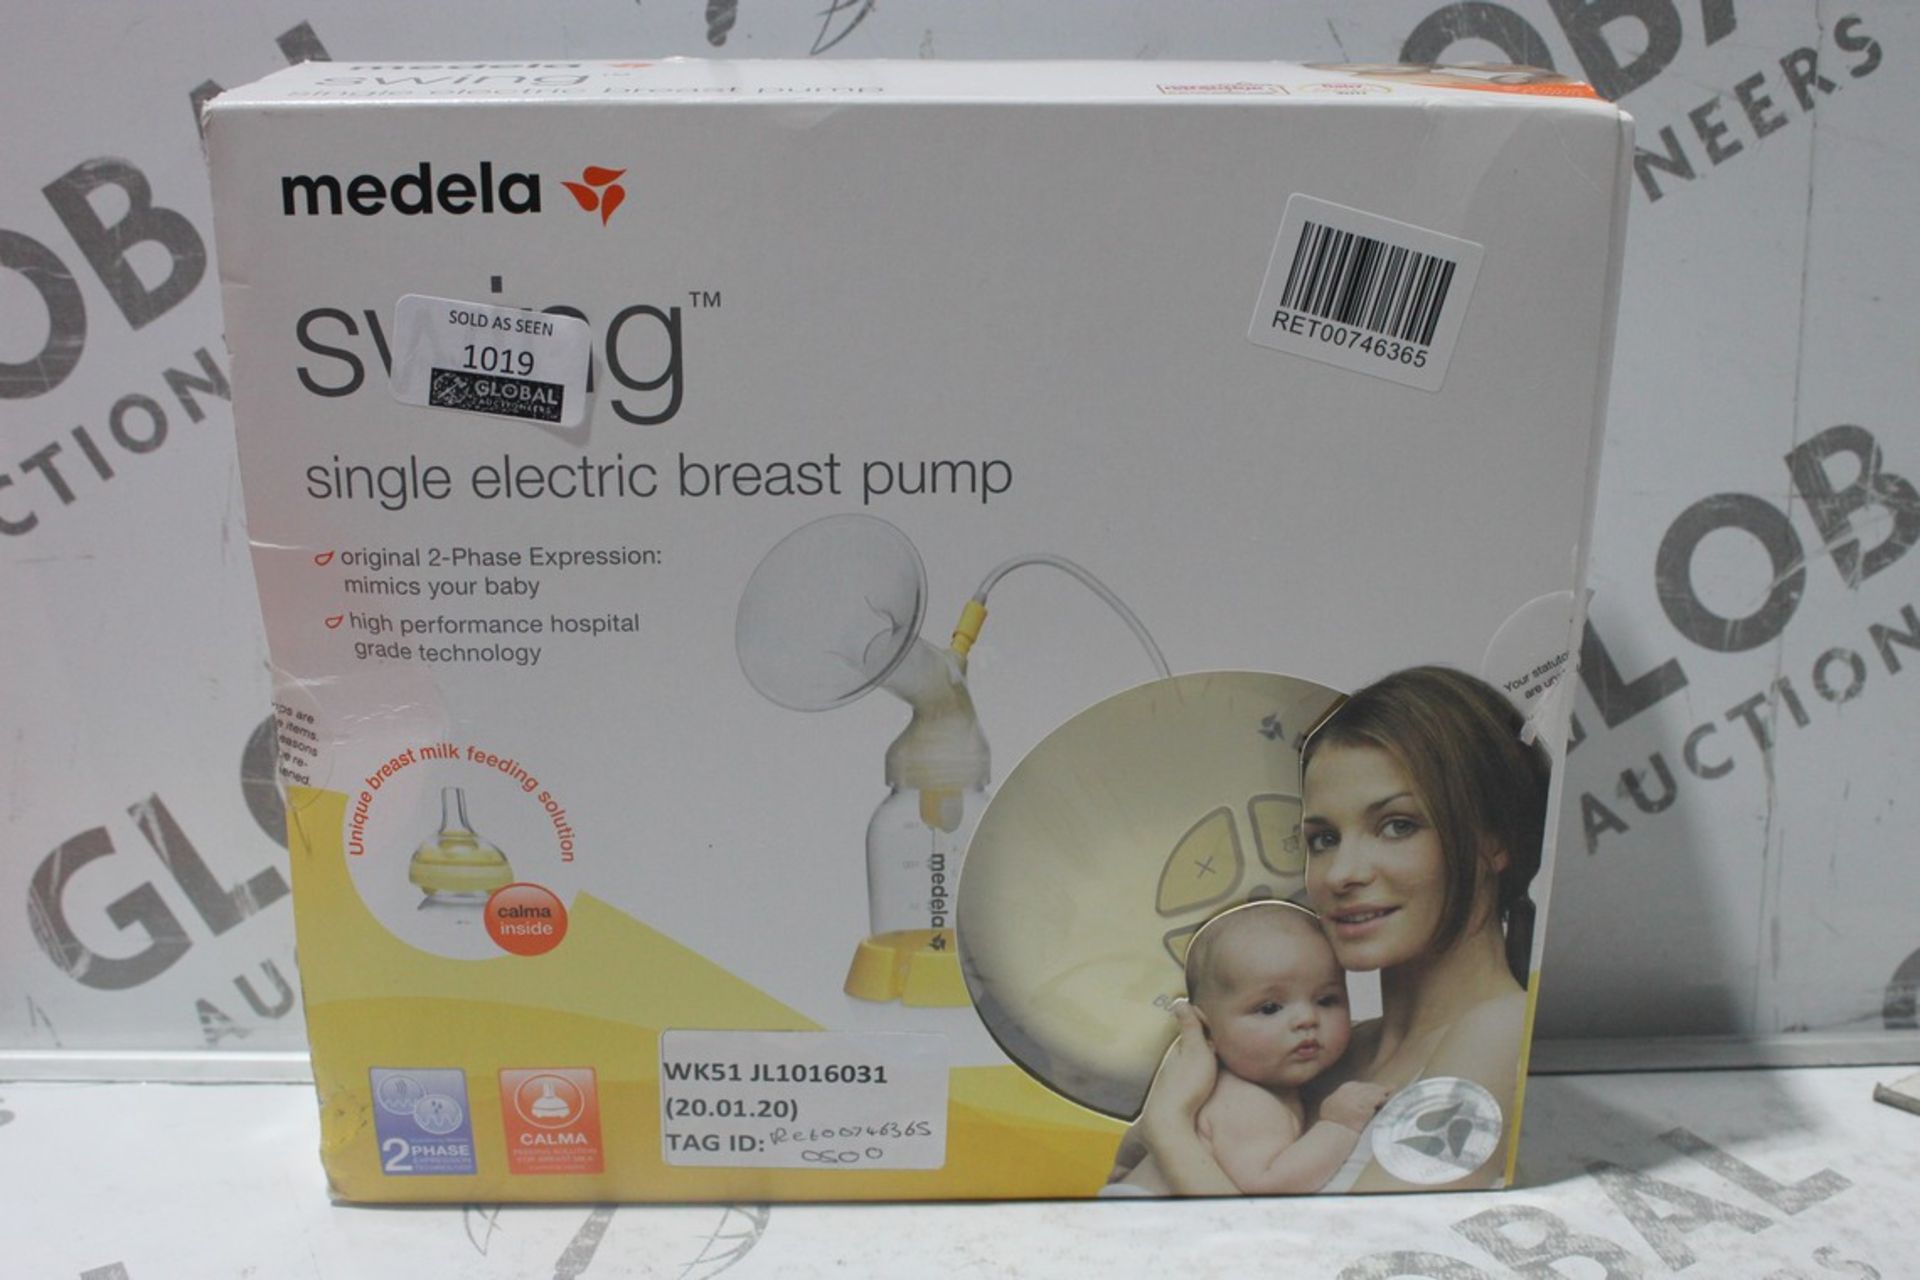 Boxed Medela Swing Single Electric Breast Pump RRP £60 (RET00746365) (Public Viewing and